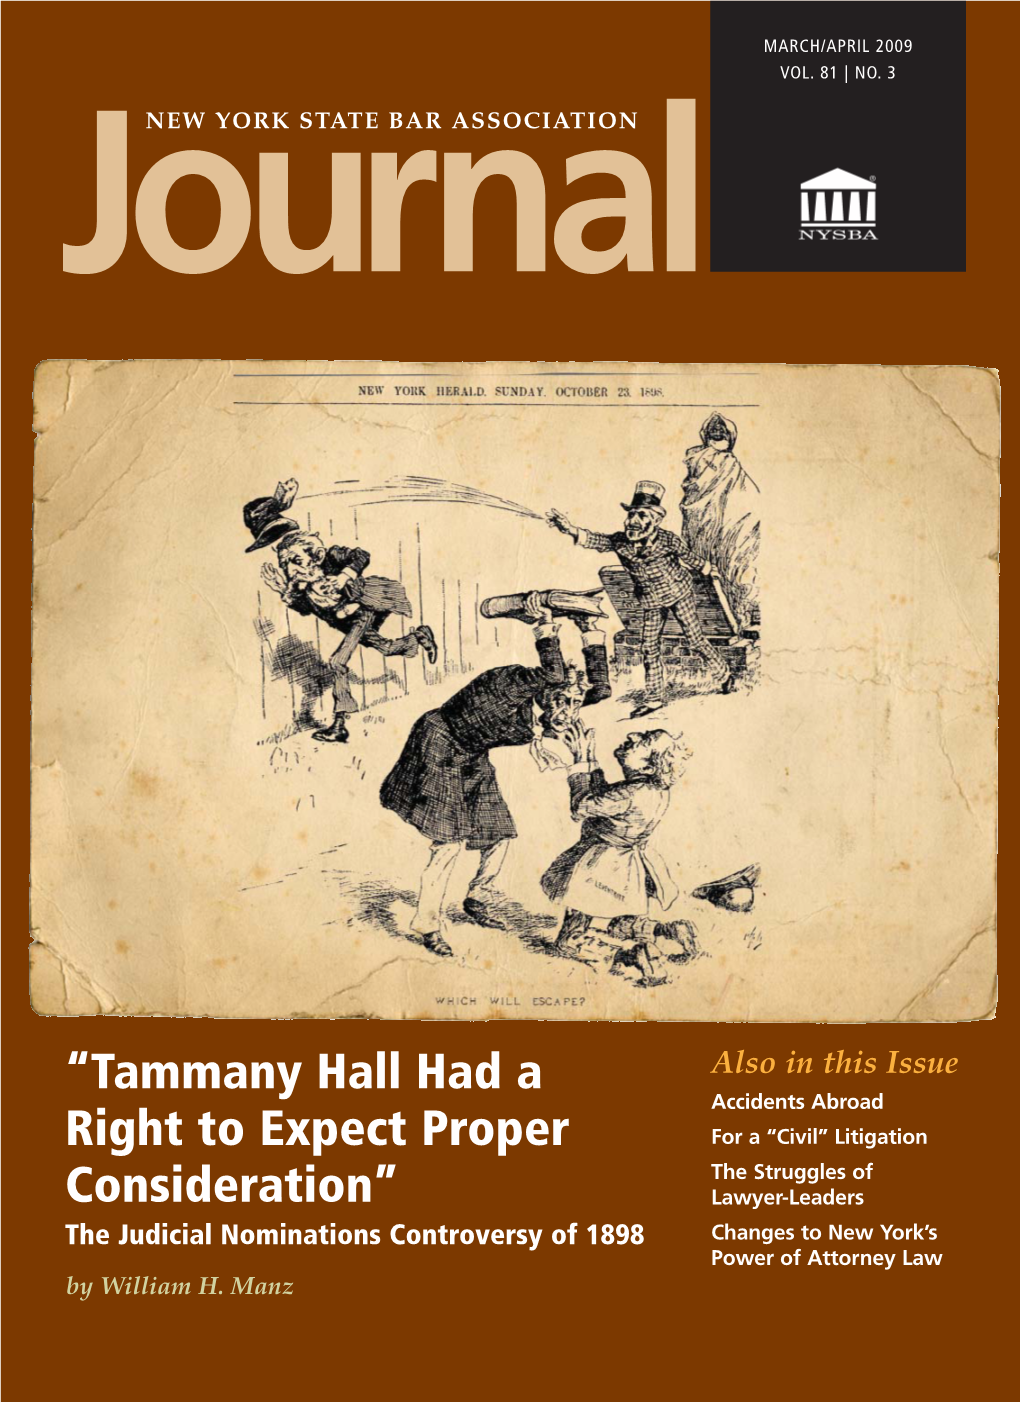 “TAMMANY HALL HAD a RIGHT to EXPECT PROPER CONSIDERATION” the Judicial Nominations Controversy of 1898 by WILLIAM H